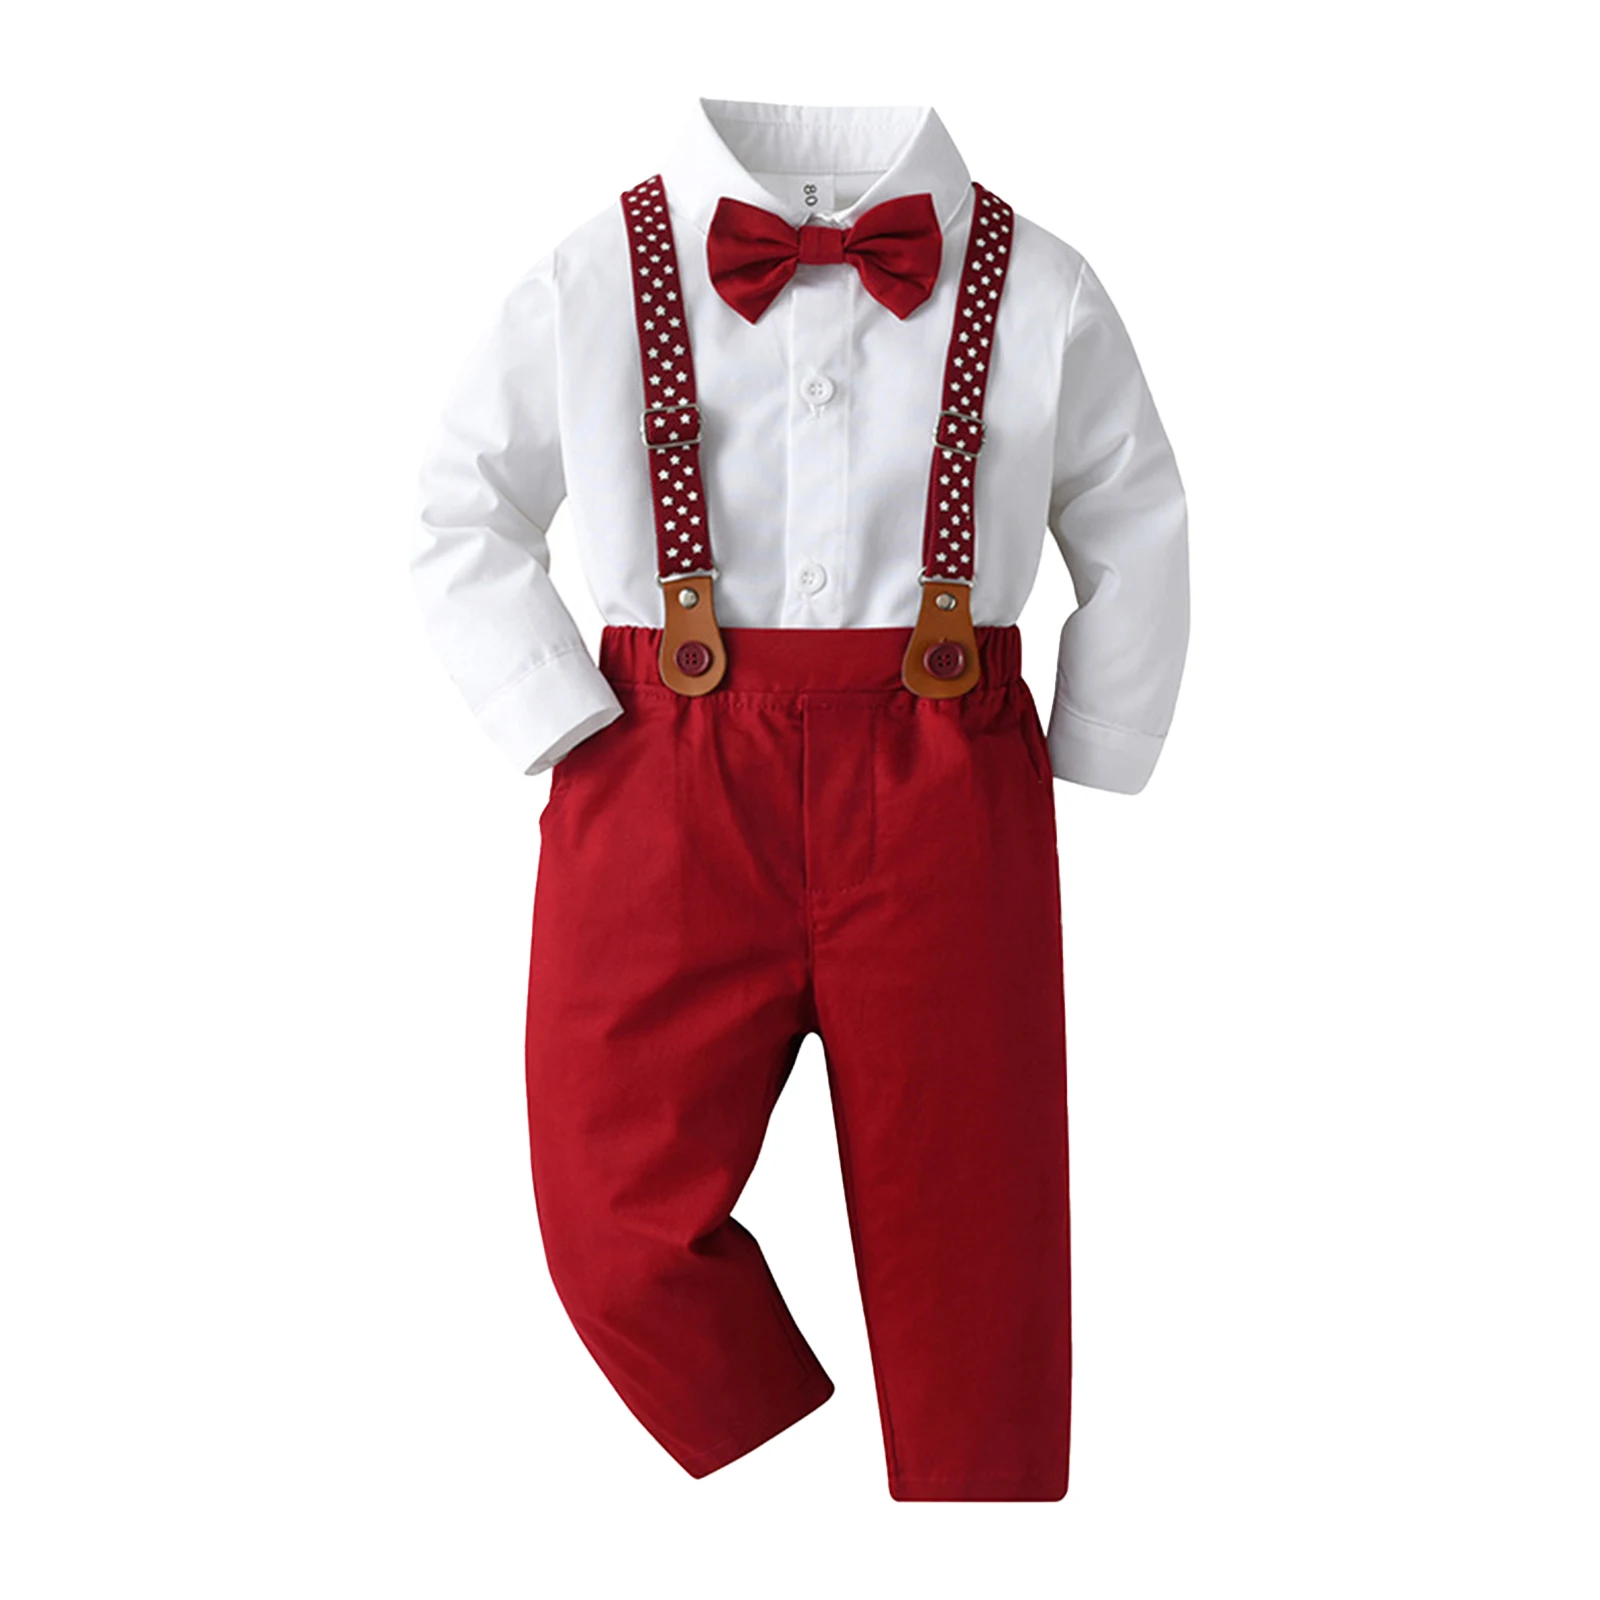 Baby Boys Gentleman Outfit Cotton Clothes Birthday Party Wedding Prom Gown Long Sleeve Shirt Top+Bowtie+Suspender Pants 3Pcs/Set premium stainless steel liquid solder tool 3pcs 20ml capacity ensures strong and long lasting soldering joints